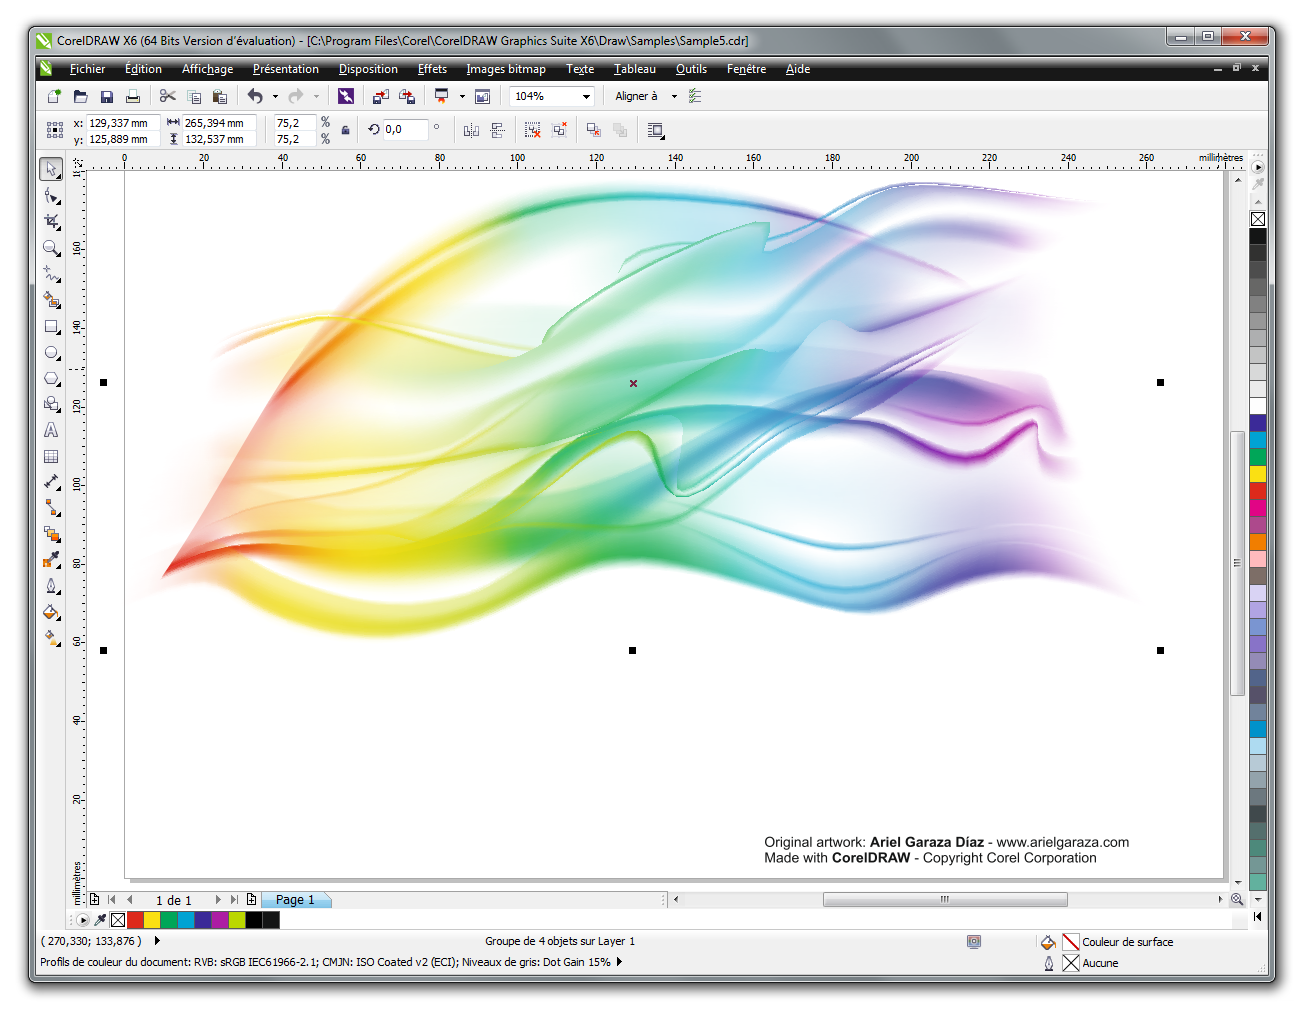 Corel DRAW Graphics Suite X6 Download Free - hitsfreesofts